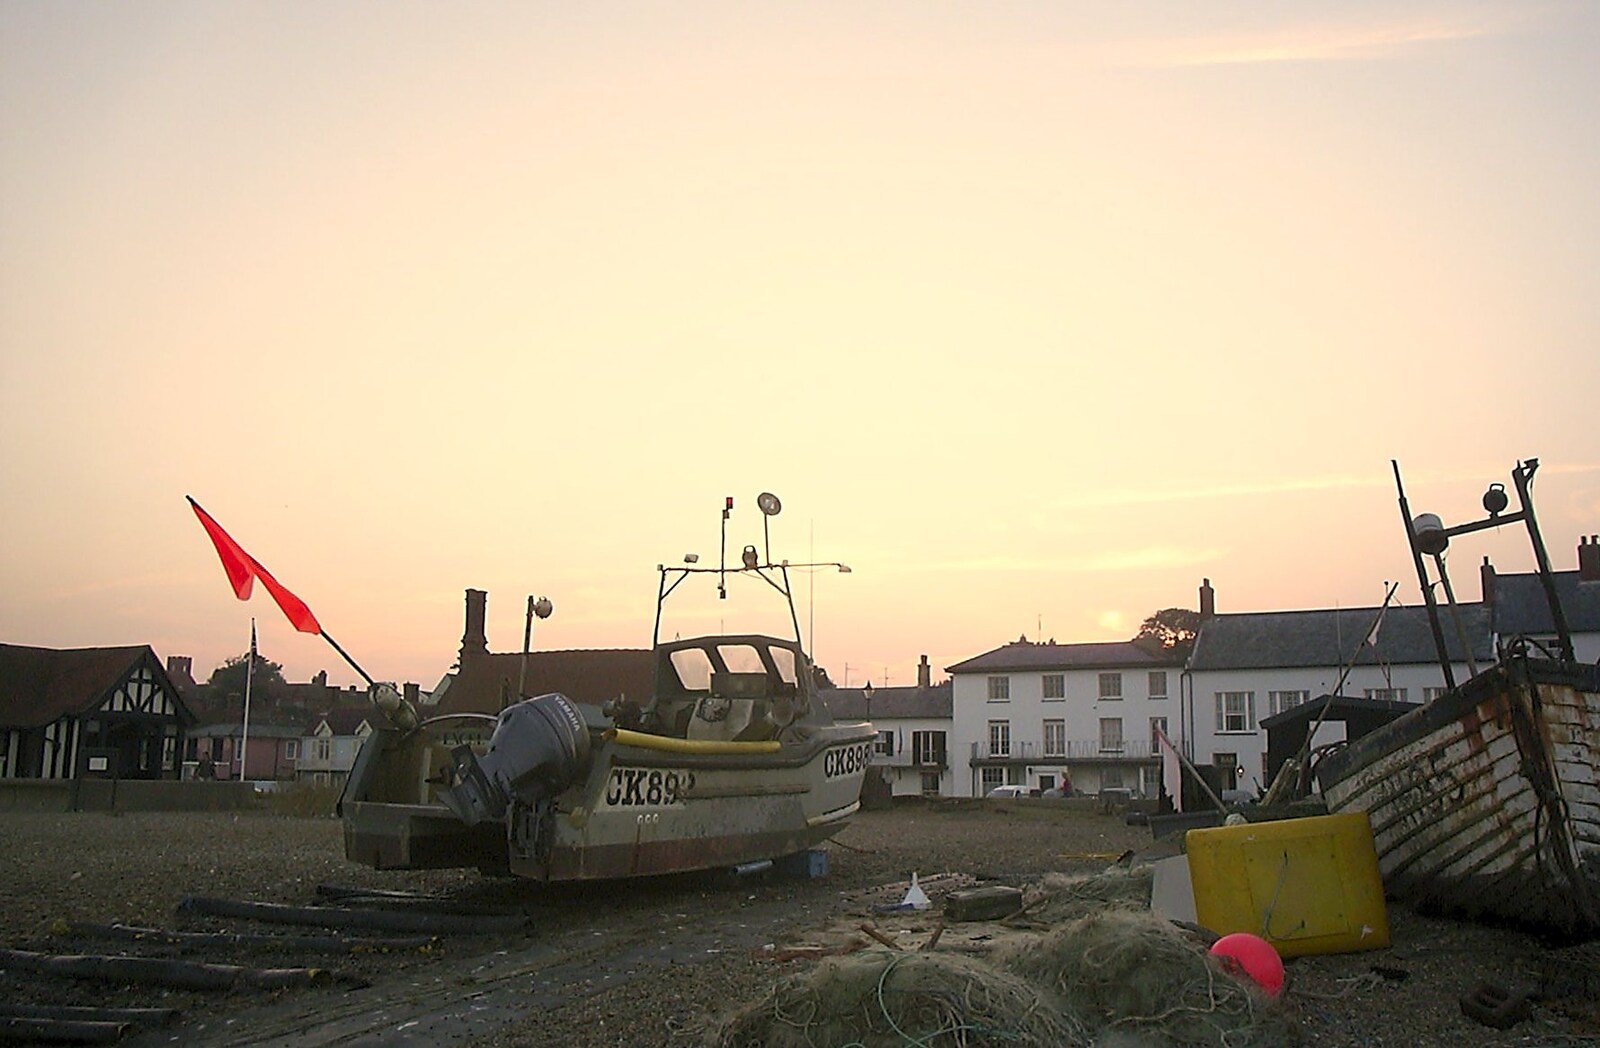 As we get to Aldeburgh, it's already sunset from Fish and Chips on the Beach, Aldeburgh, Suffolk - 12th September 2003